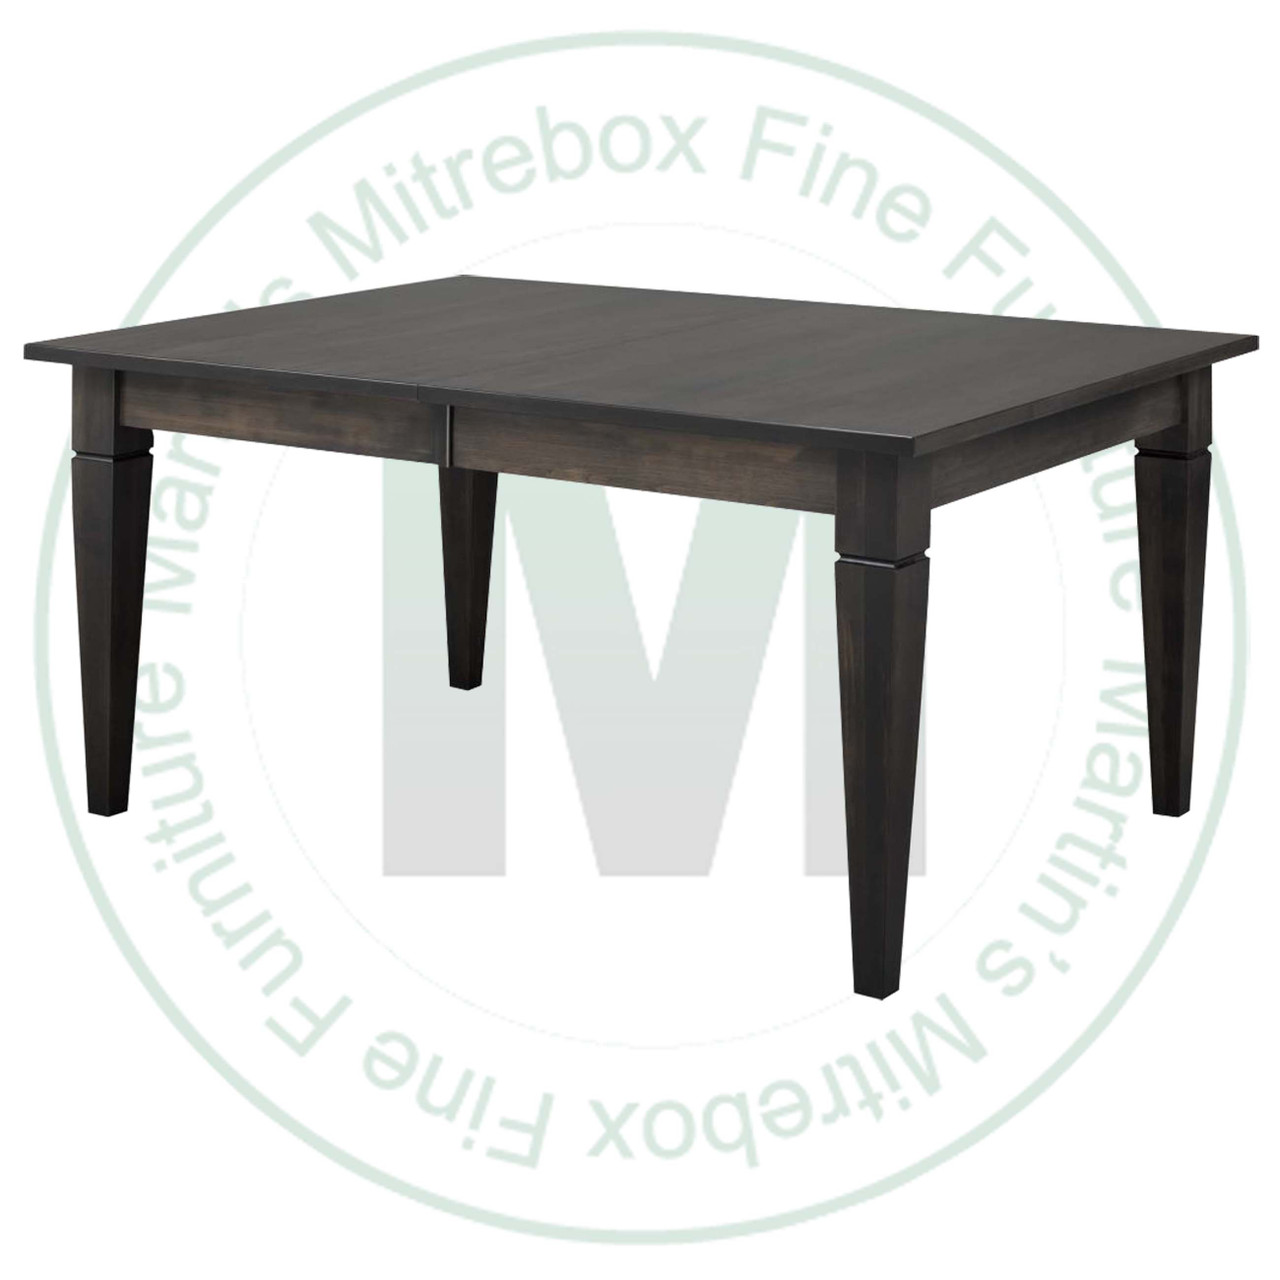 Wormy Maple Reesor Extension Harvest Table 42''D x 84''W x 30''H With 2 - 12'' Leaves Table Has 1'' Thick Top